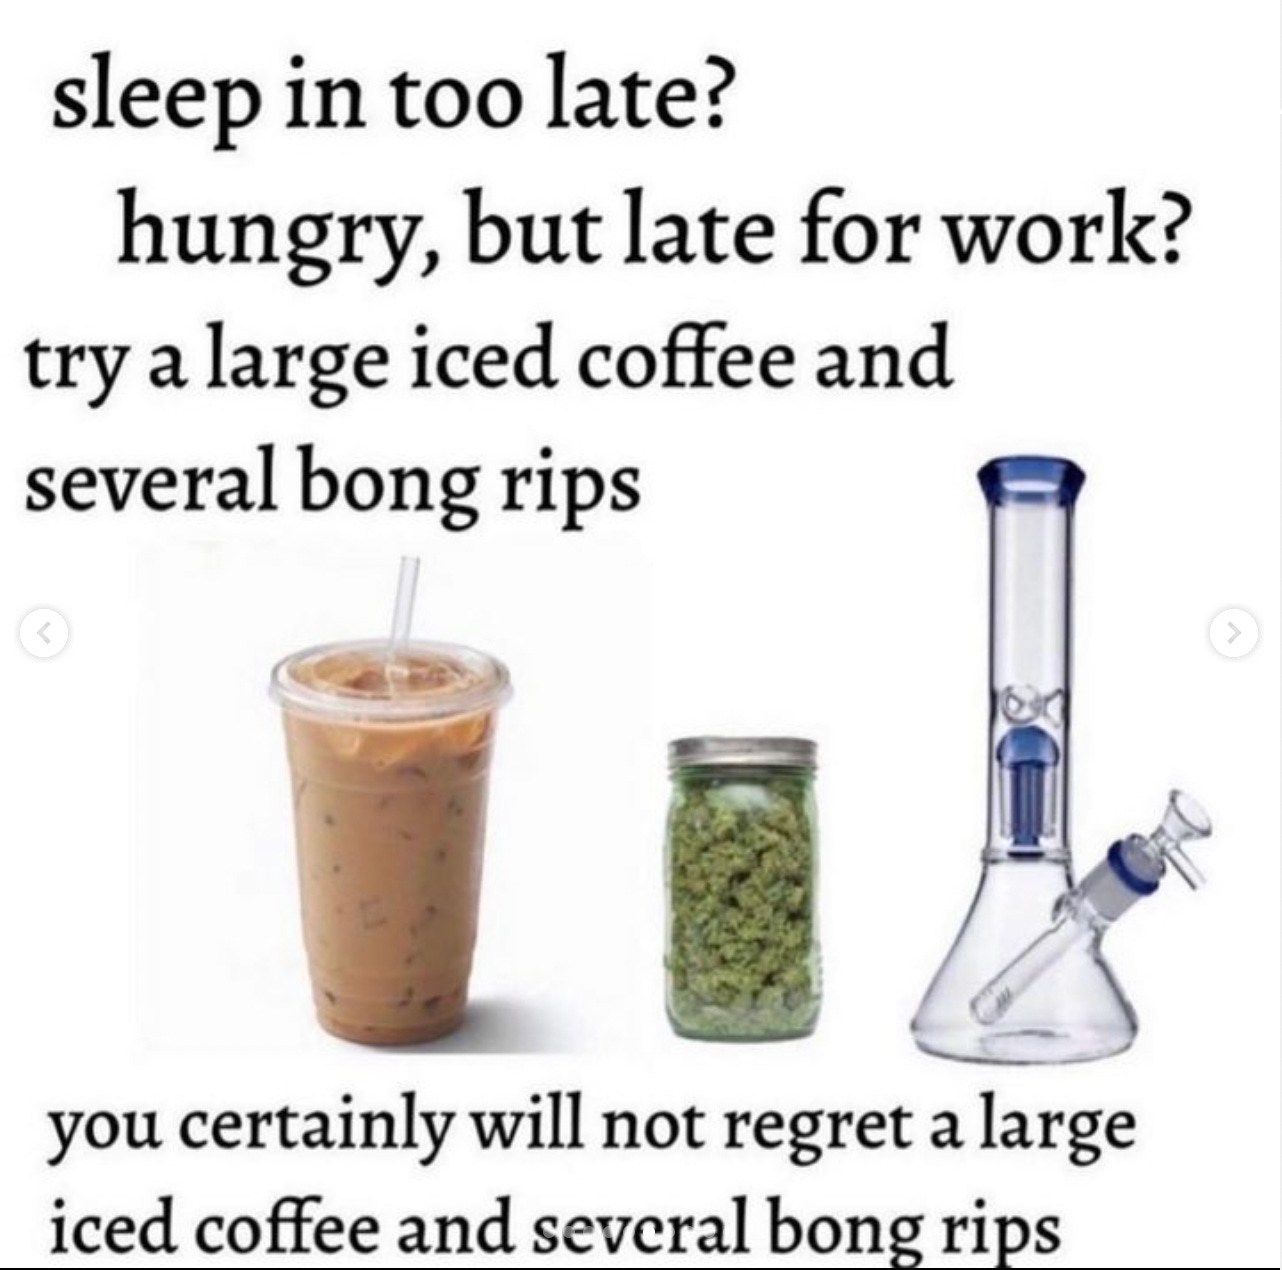 Around images of a large iced coffee, a jar of weed, and a big bong, are the words "sleep in too late? hungry and late for work? try a large iced coffee and several bong rips, you certainly will not regret a large iced coffee and several bong rips."